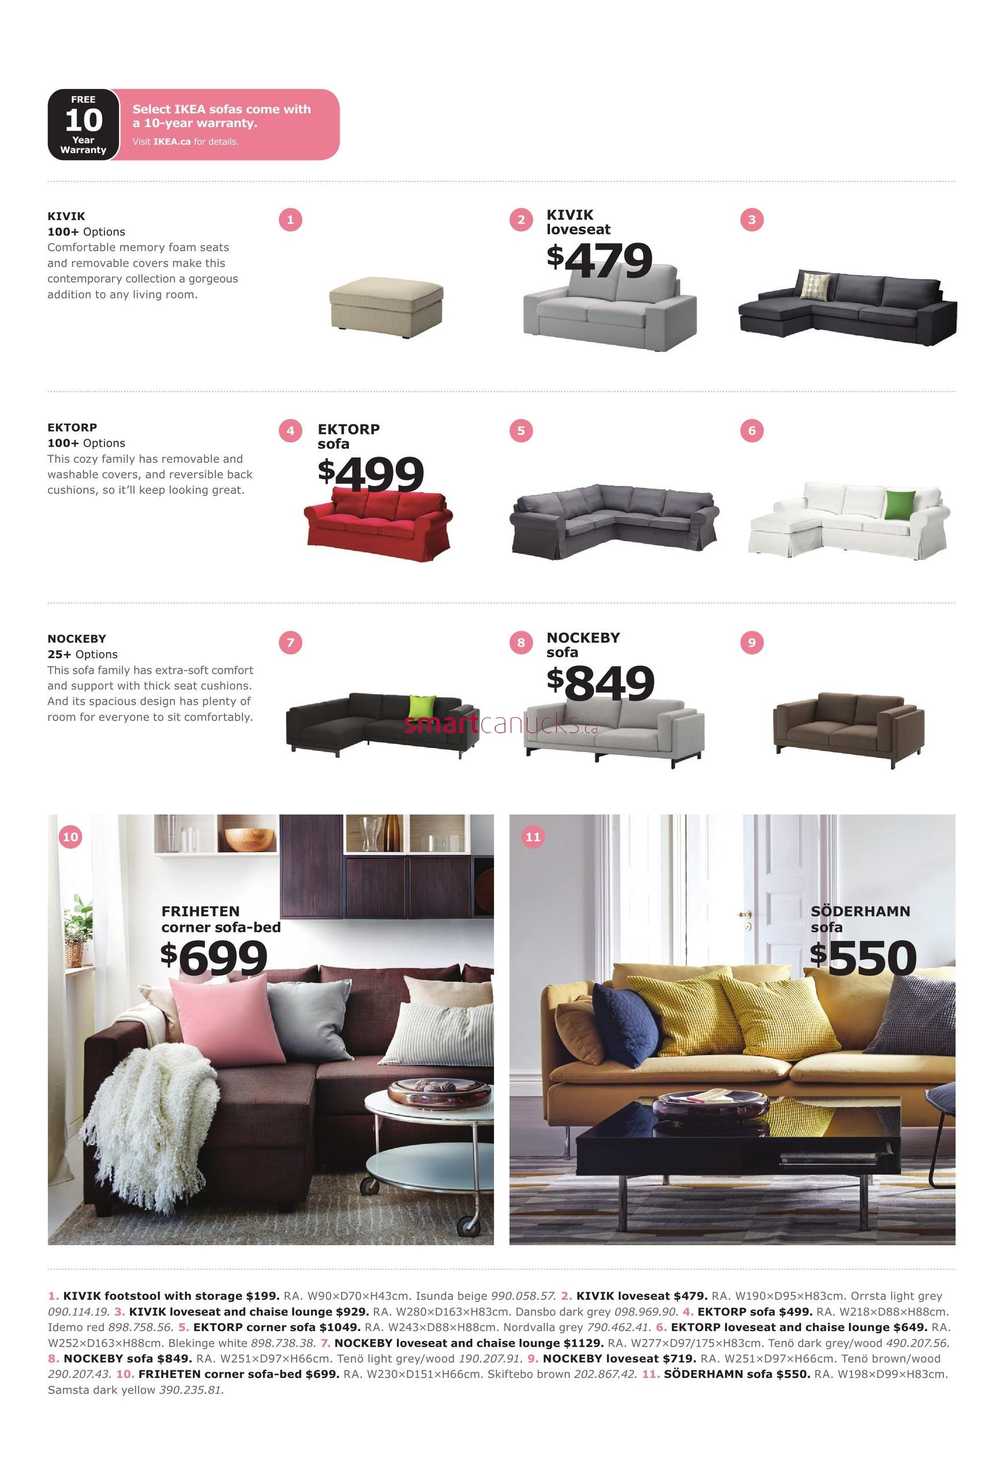 Ikea Sofa Event Flyer April 6 To 20